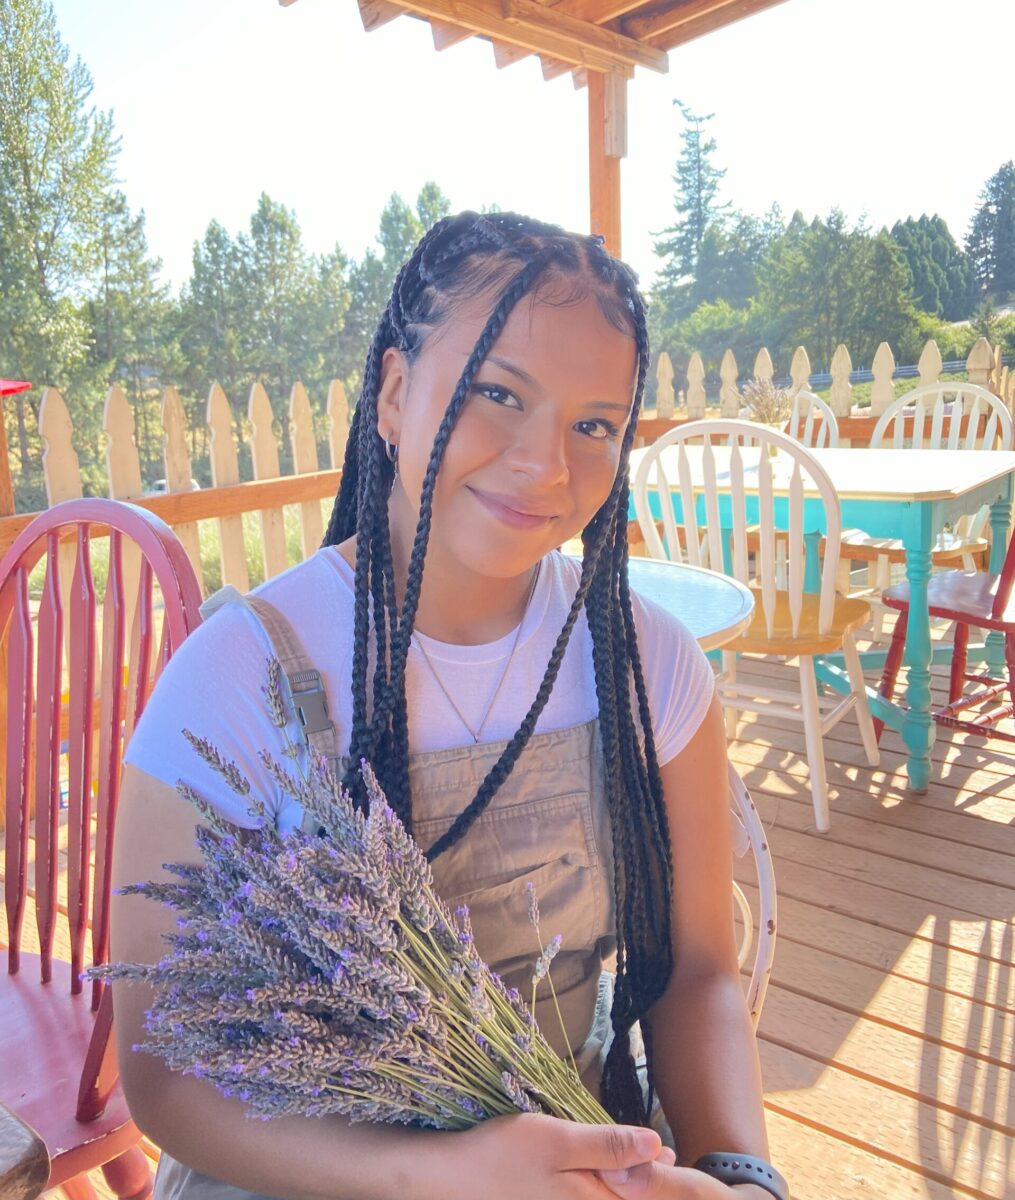 Picture of young woman with braids smiling and holding bouquet of lavender in a shady outdoor area.